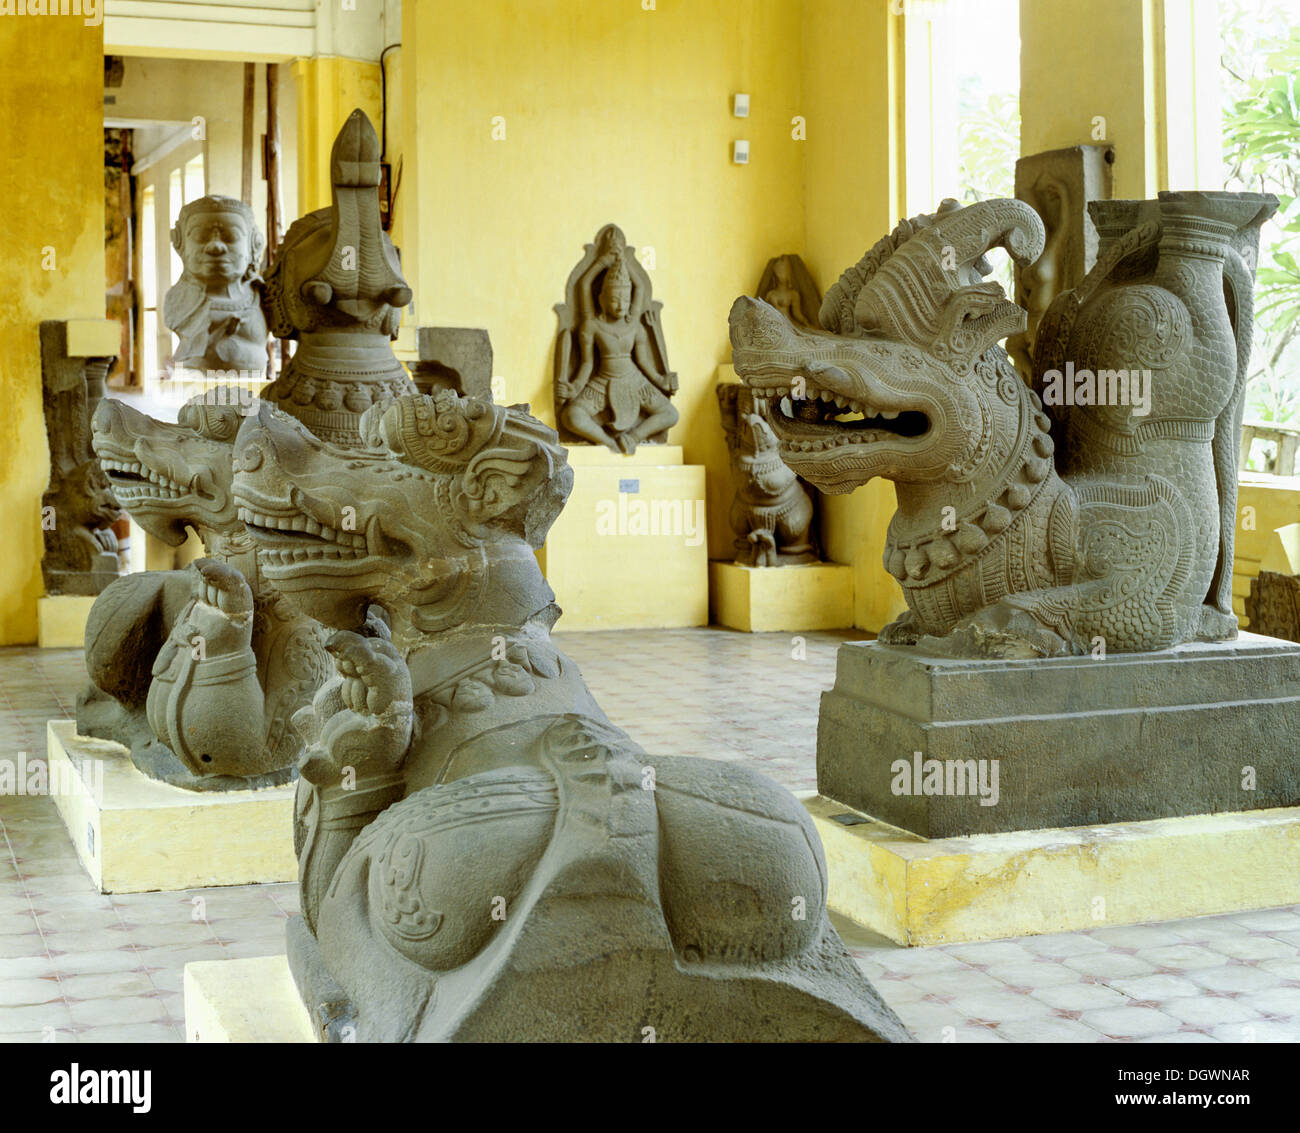 Makara, water monsters, mythical creatures, sandstone sculptures, Thap Mam style, 12-14th century, Thap Mam room, Cham Museum Stock Photo